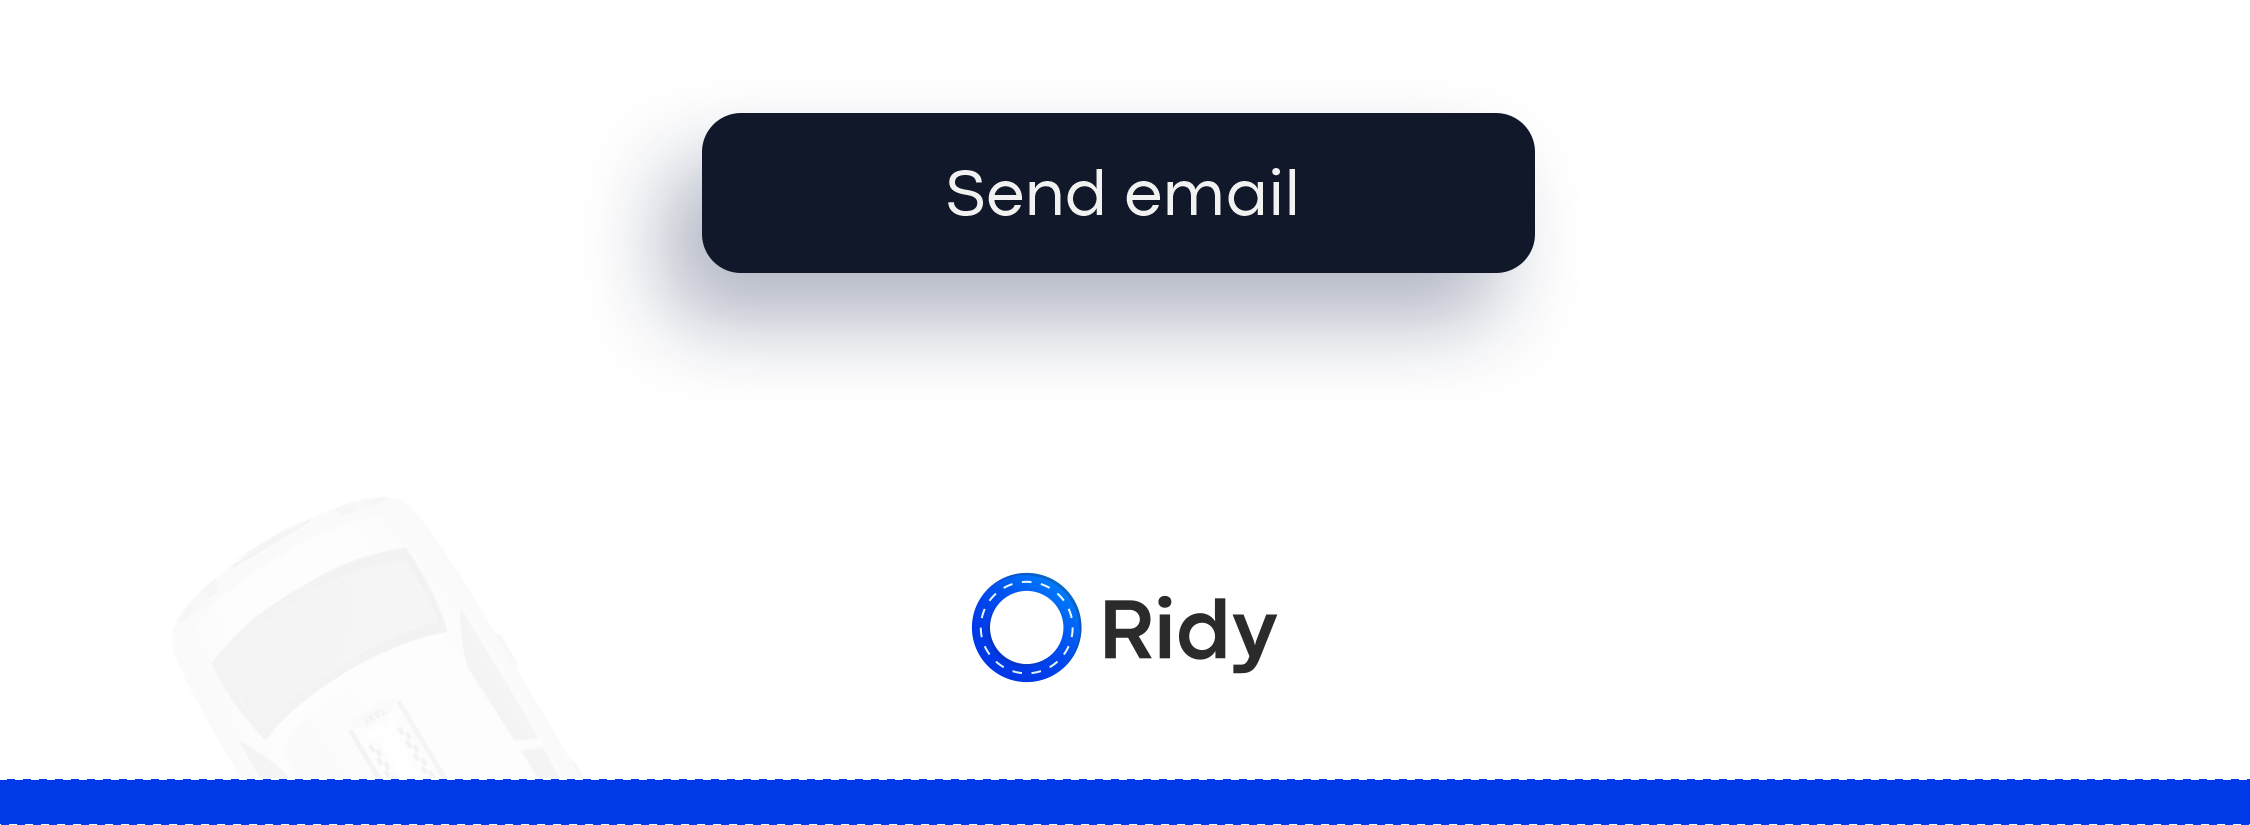 Ridy Taxi Applcation - Complete Taxi Solution with Admin Panel - 12